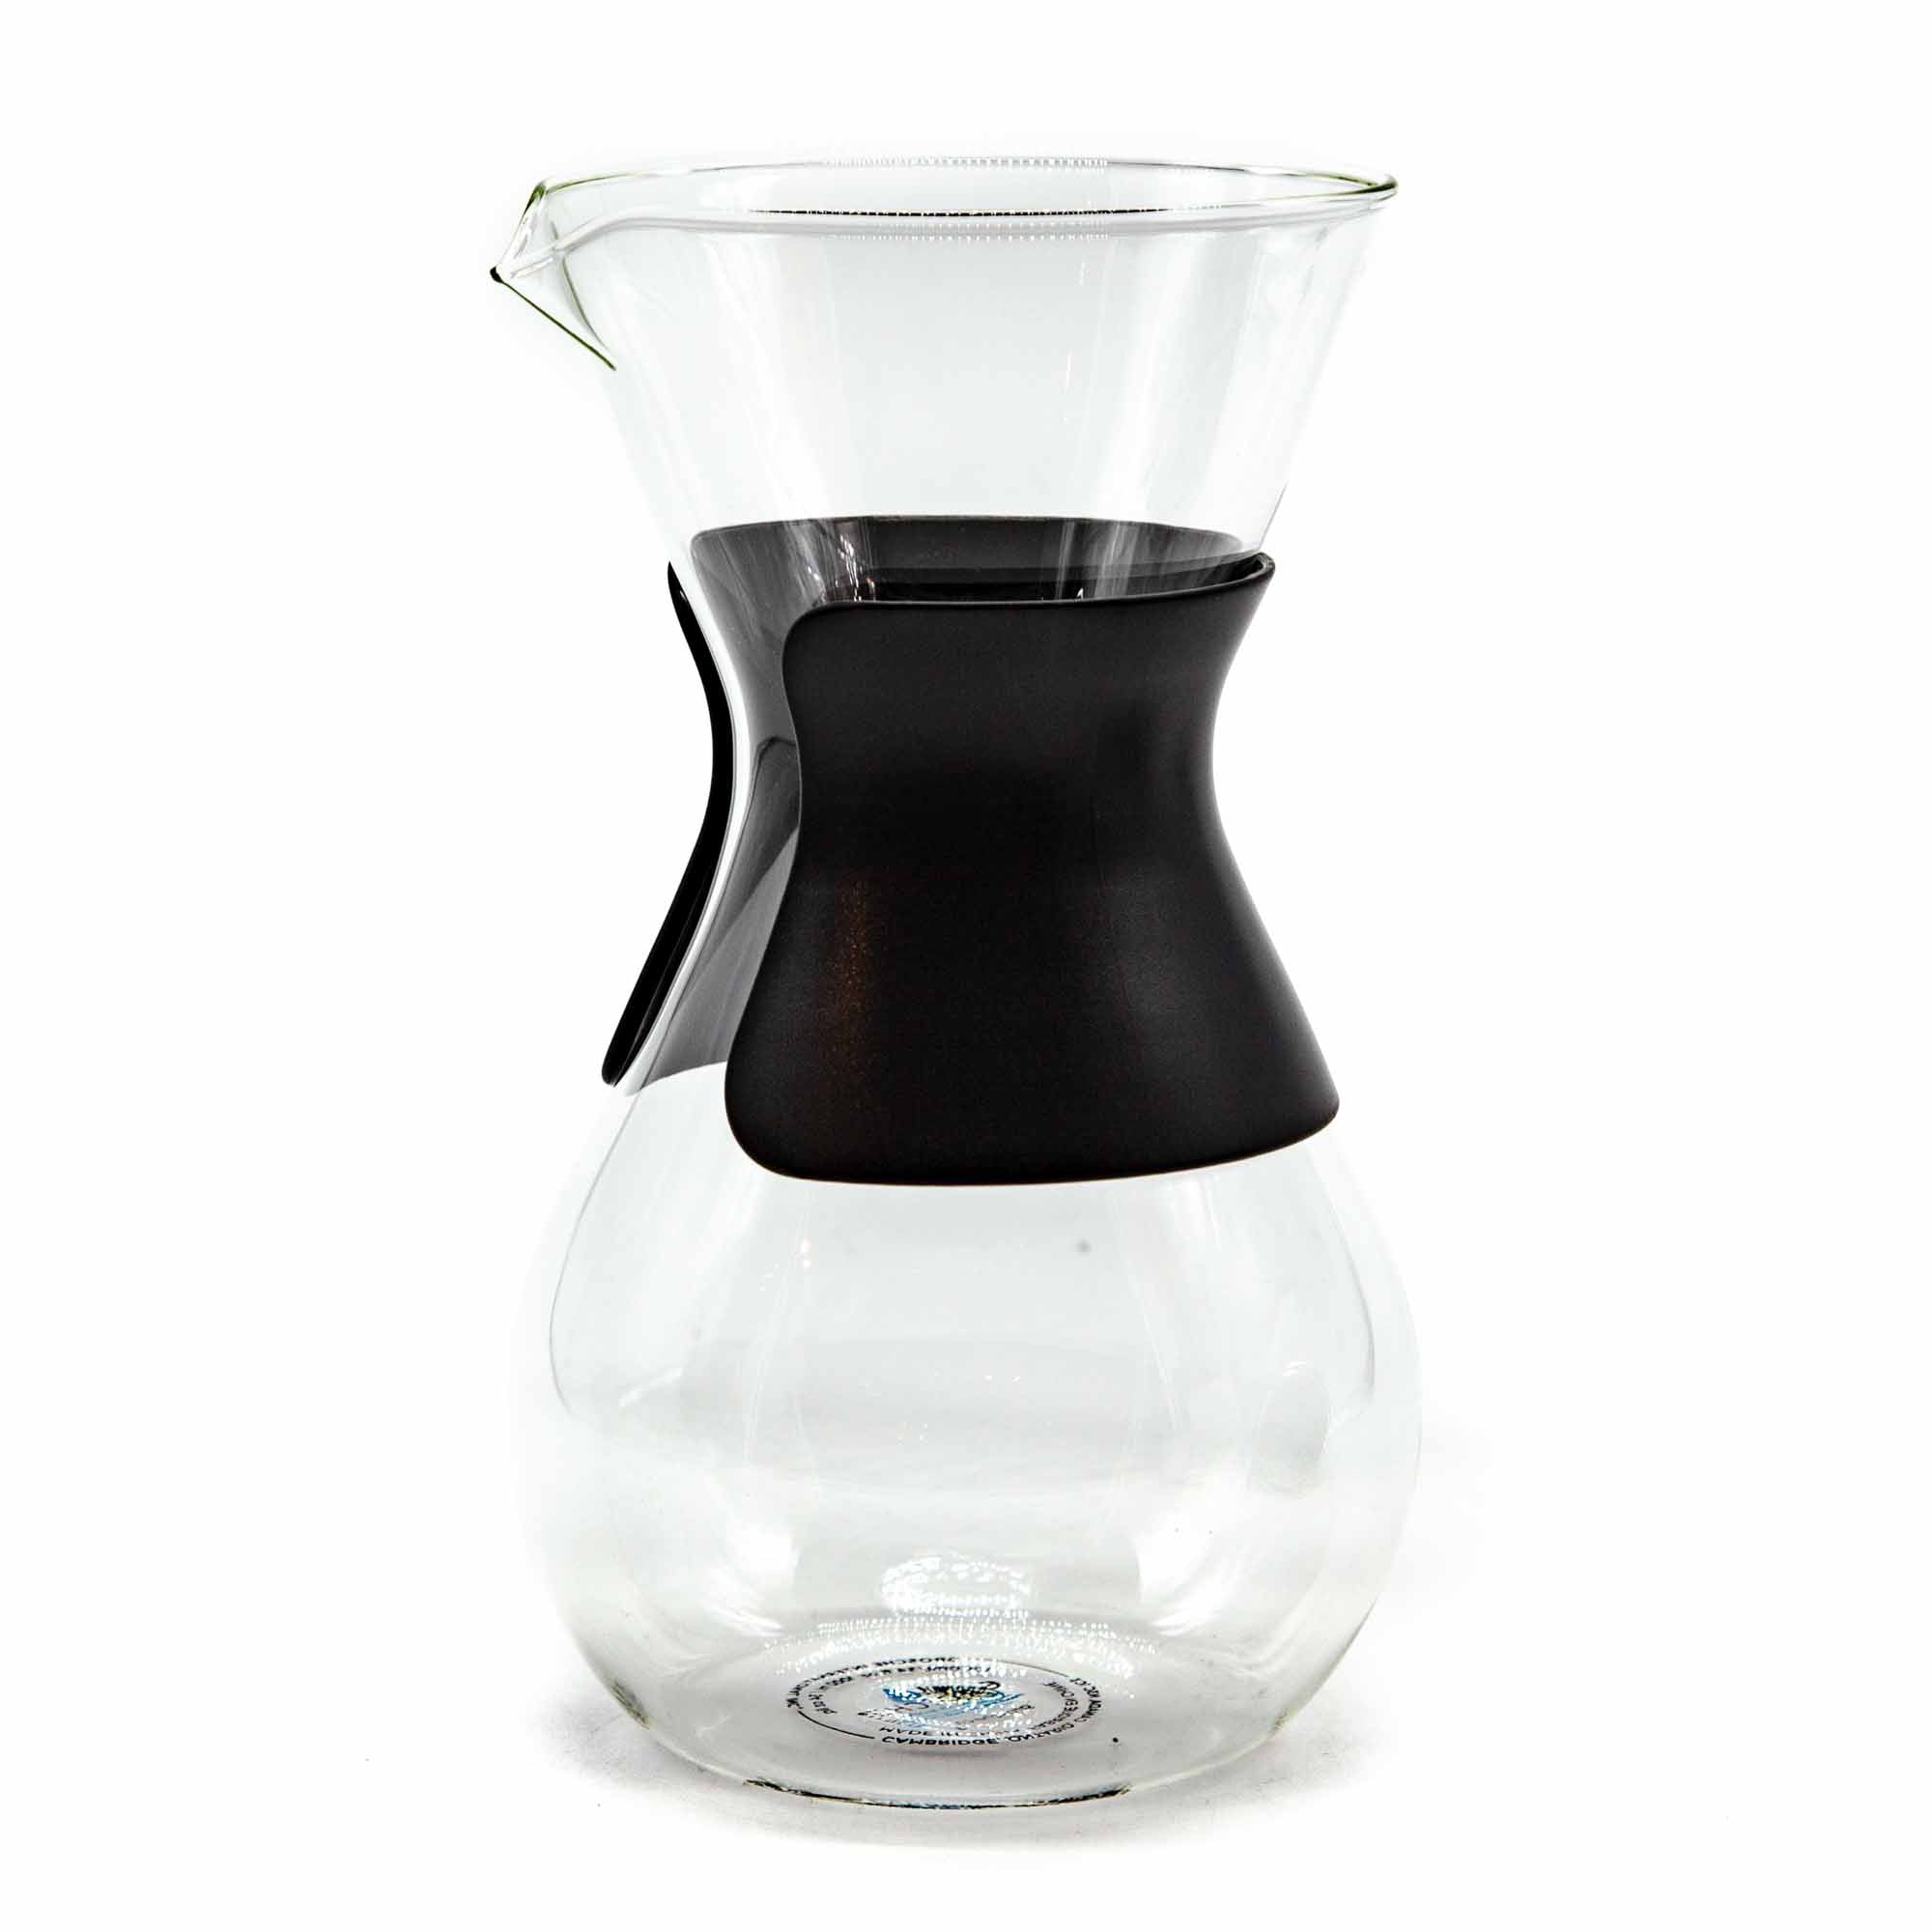 Grosche Austin G6 Pour Over Coffee Maker - Mortise And Tenon